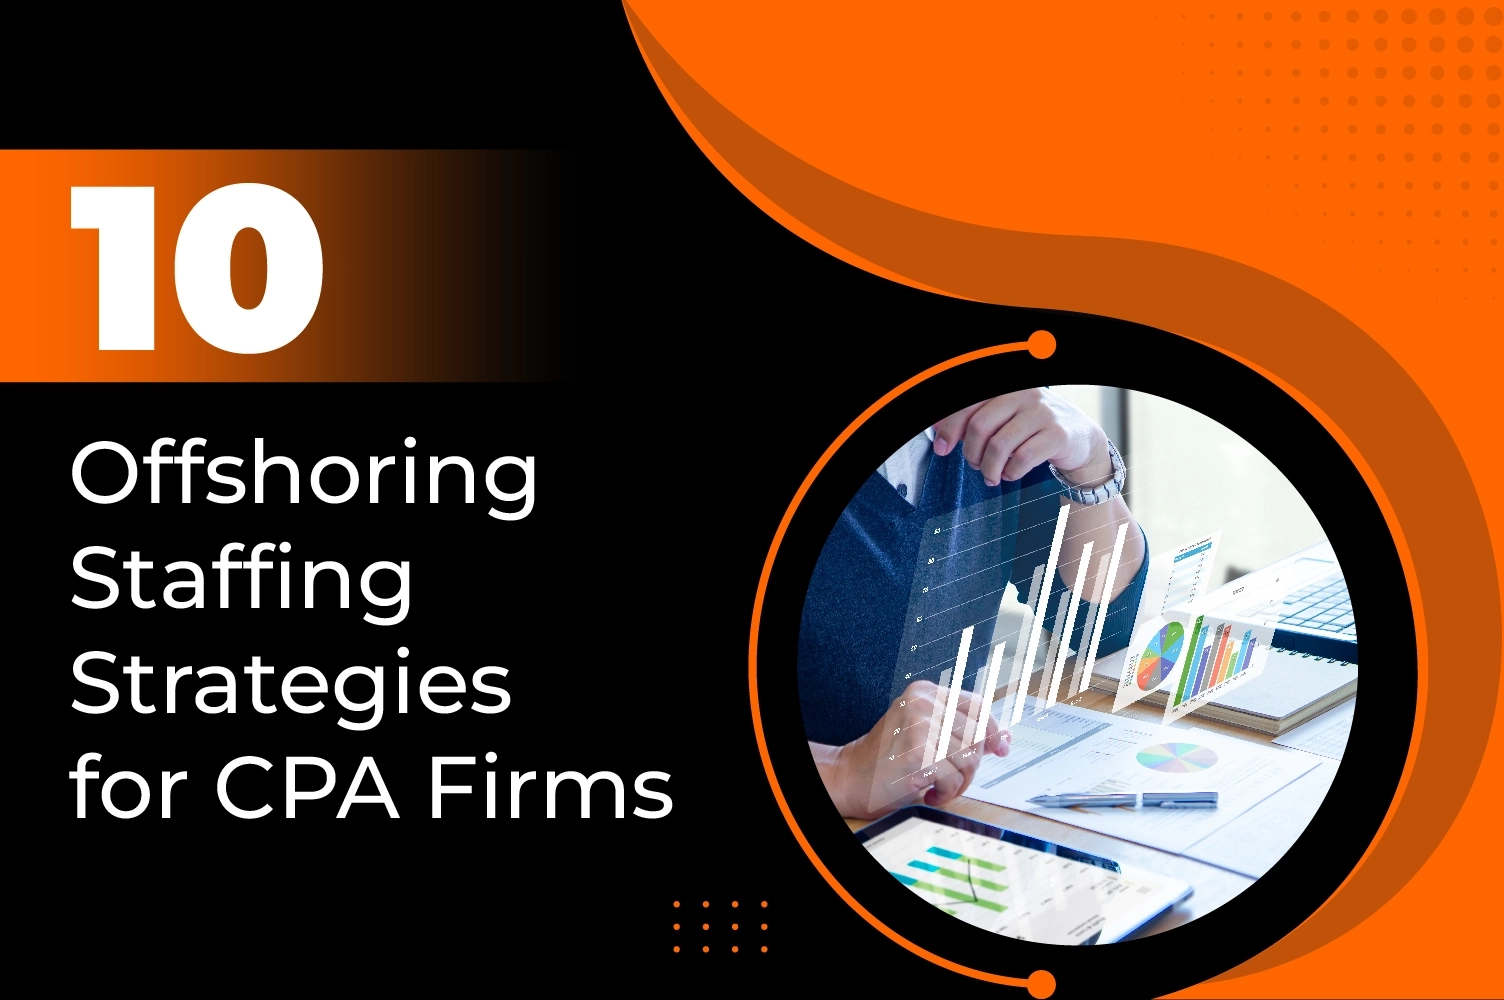 10 Offshore Staffing Strategies - The Ultimate Game Changer For CPA Firms